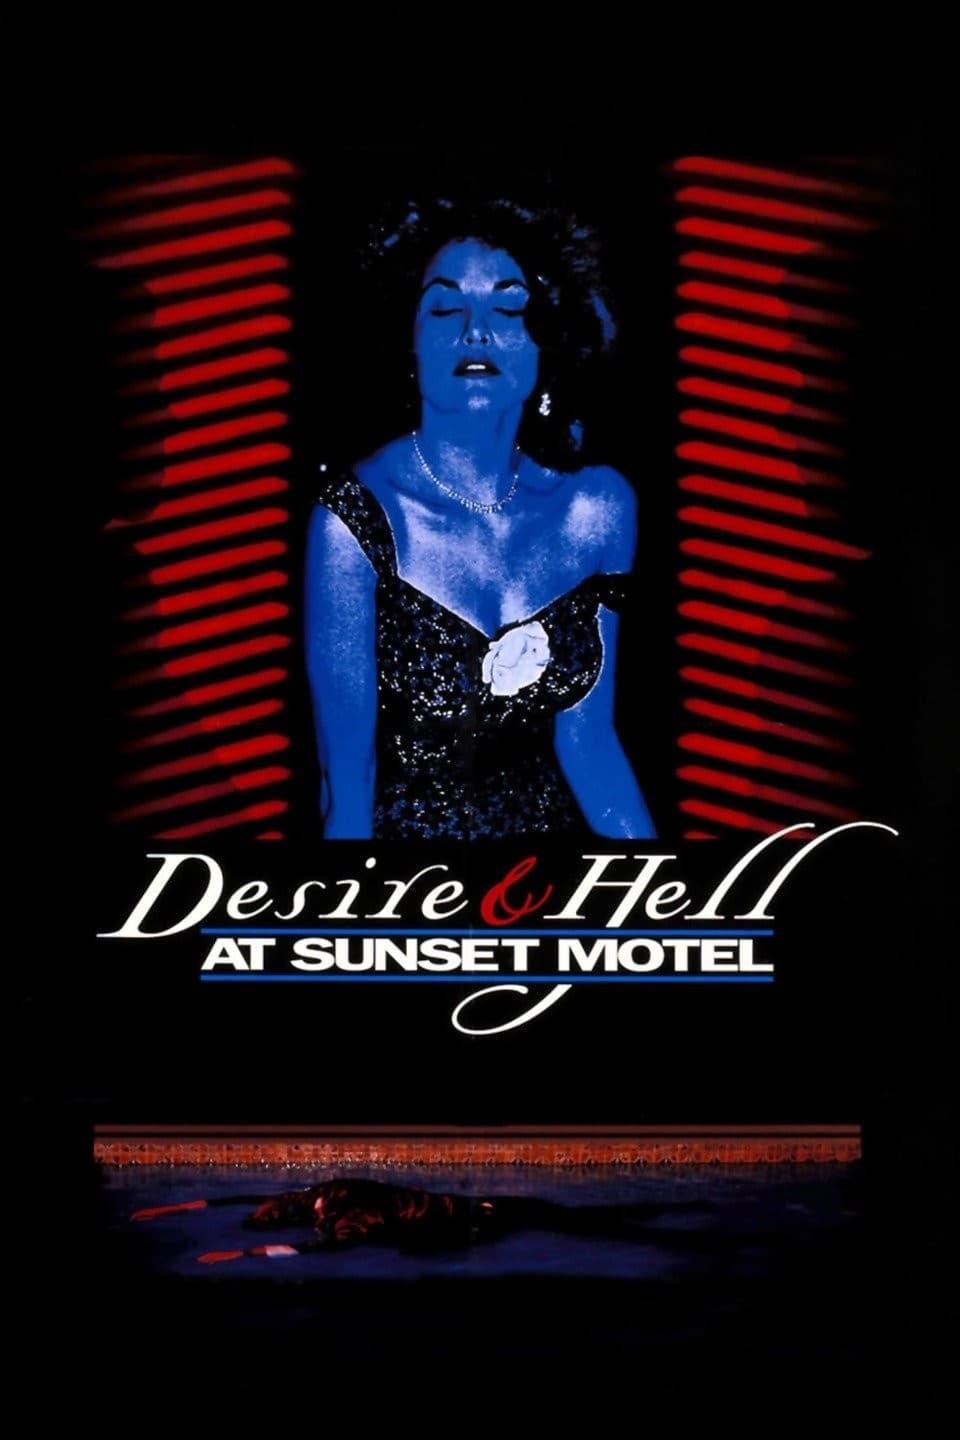 Desire and Hell at Sunset Motel poster